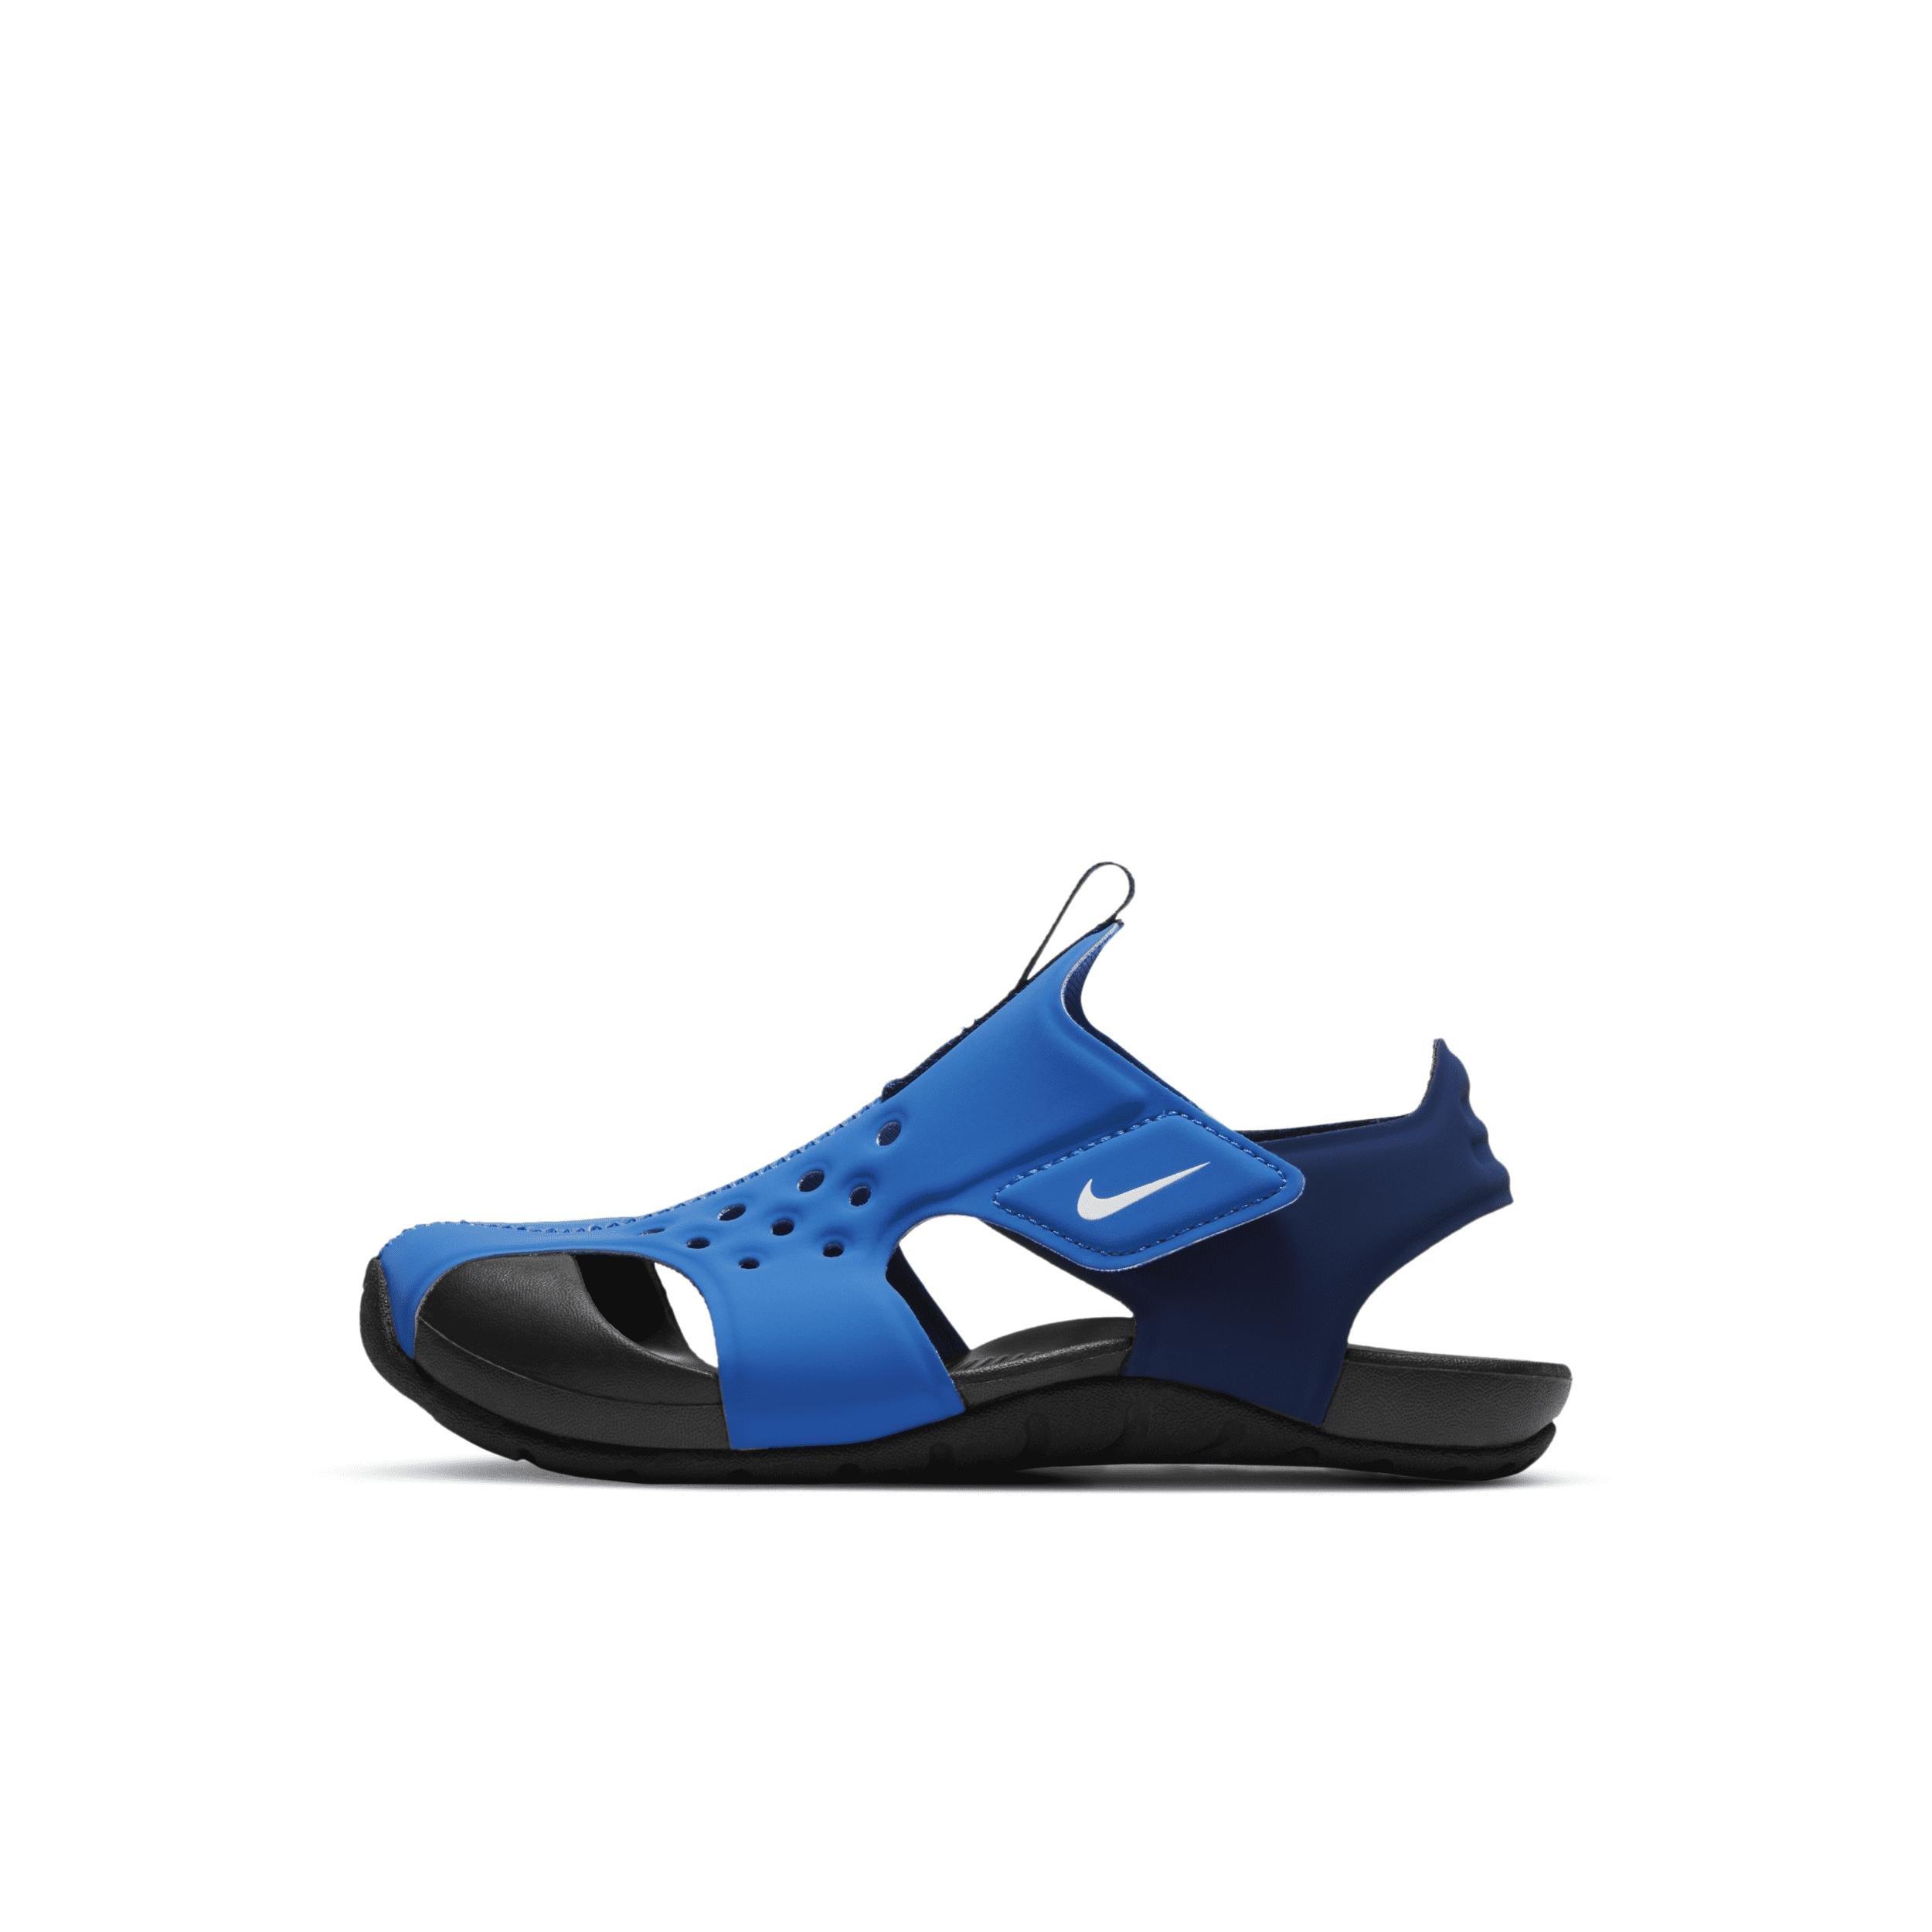 Nike Sunray Protect 2 Little Kids' Sandals by NIKE